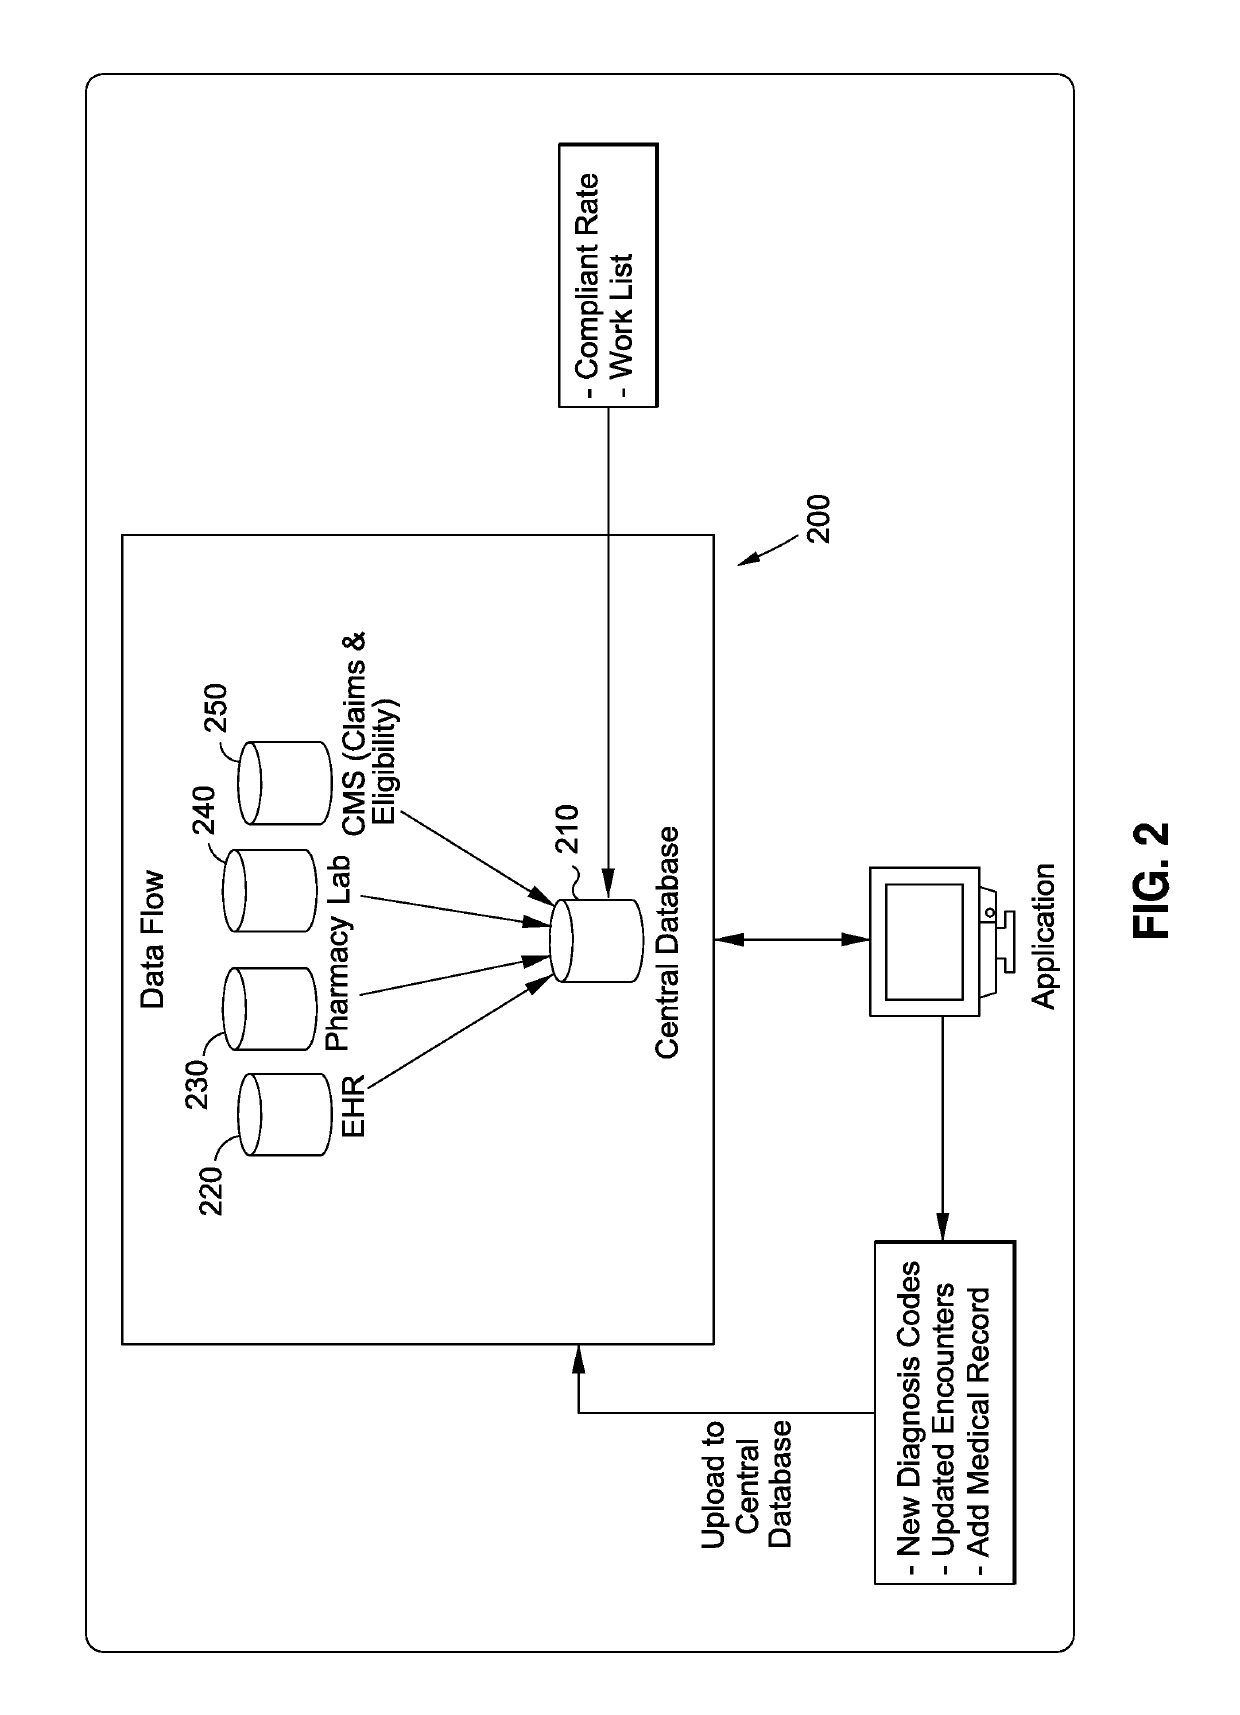 Methods for administering preventative healthcare to a patient population